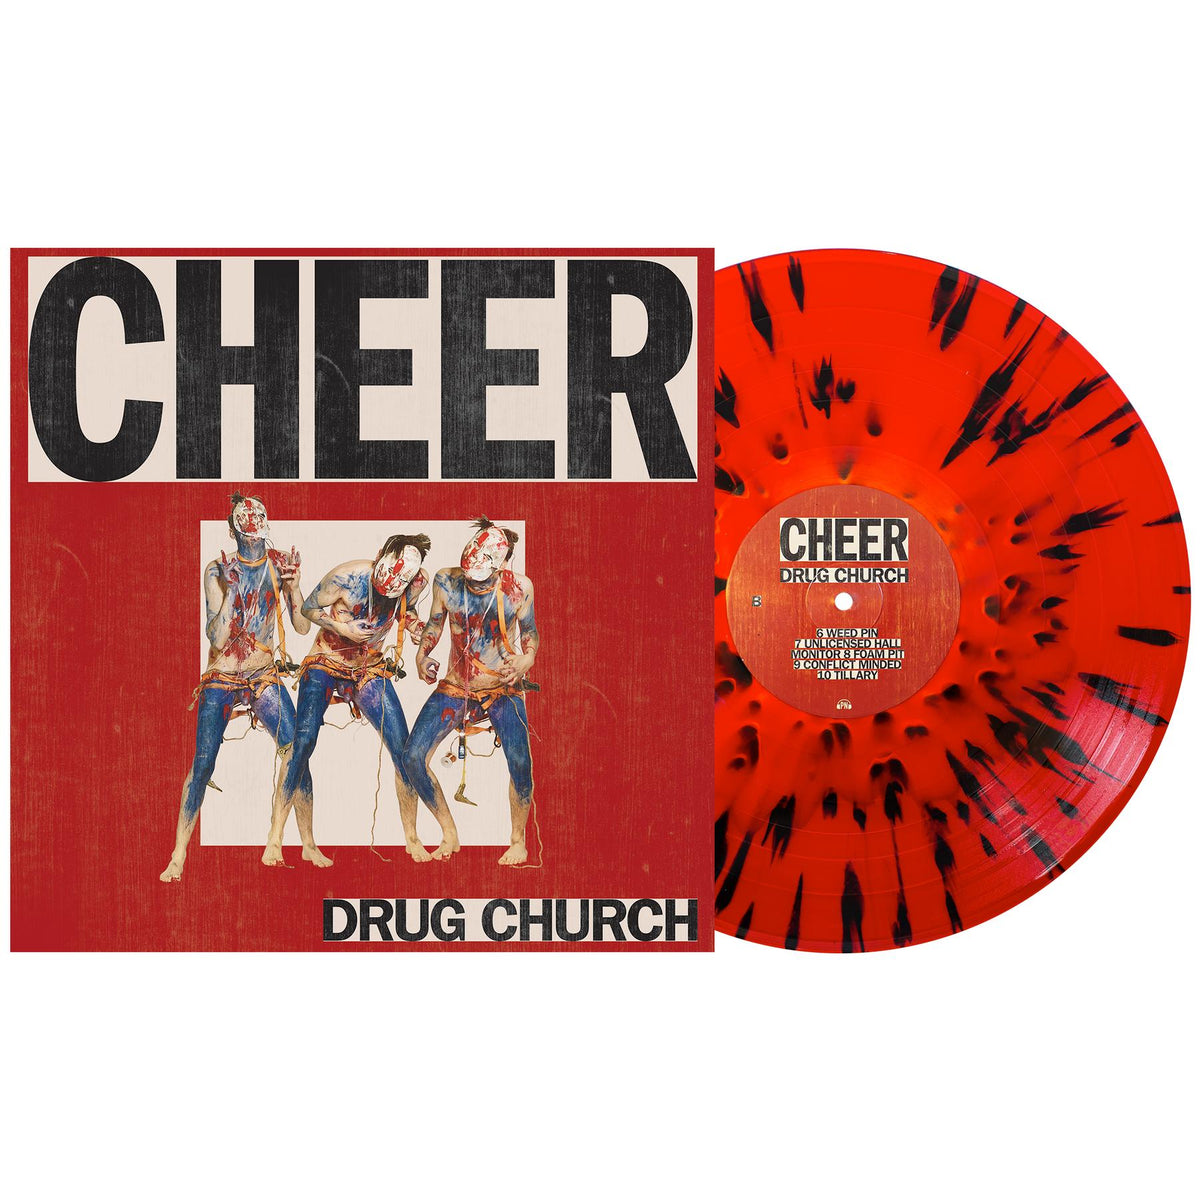 Drug Church - Cheer LP (Limited Edition Colored Vinyl)